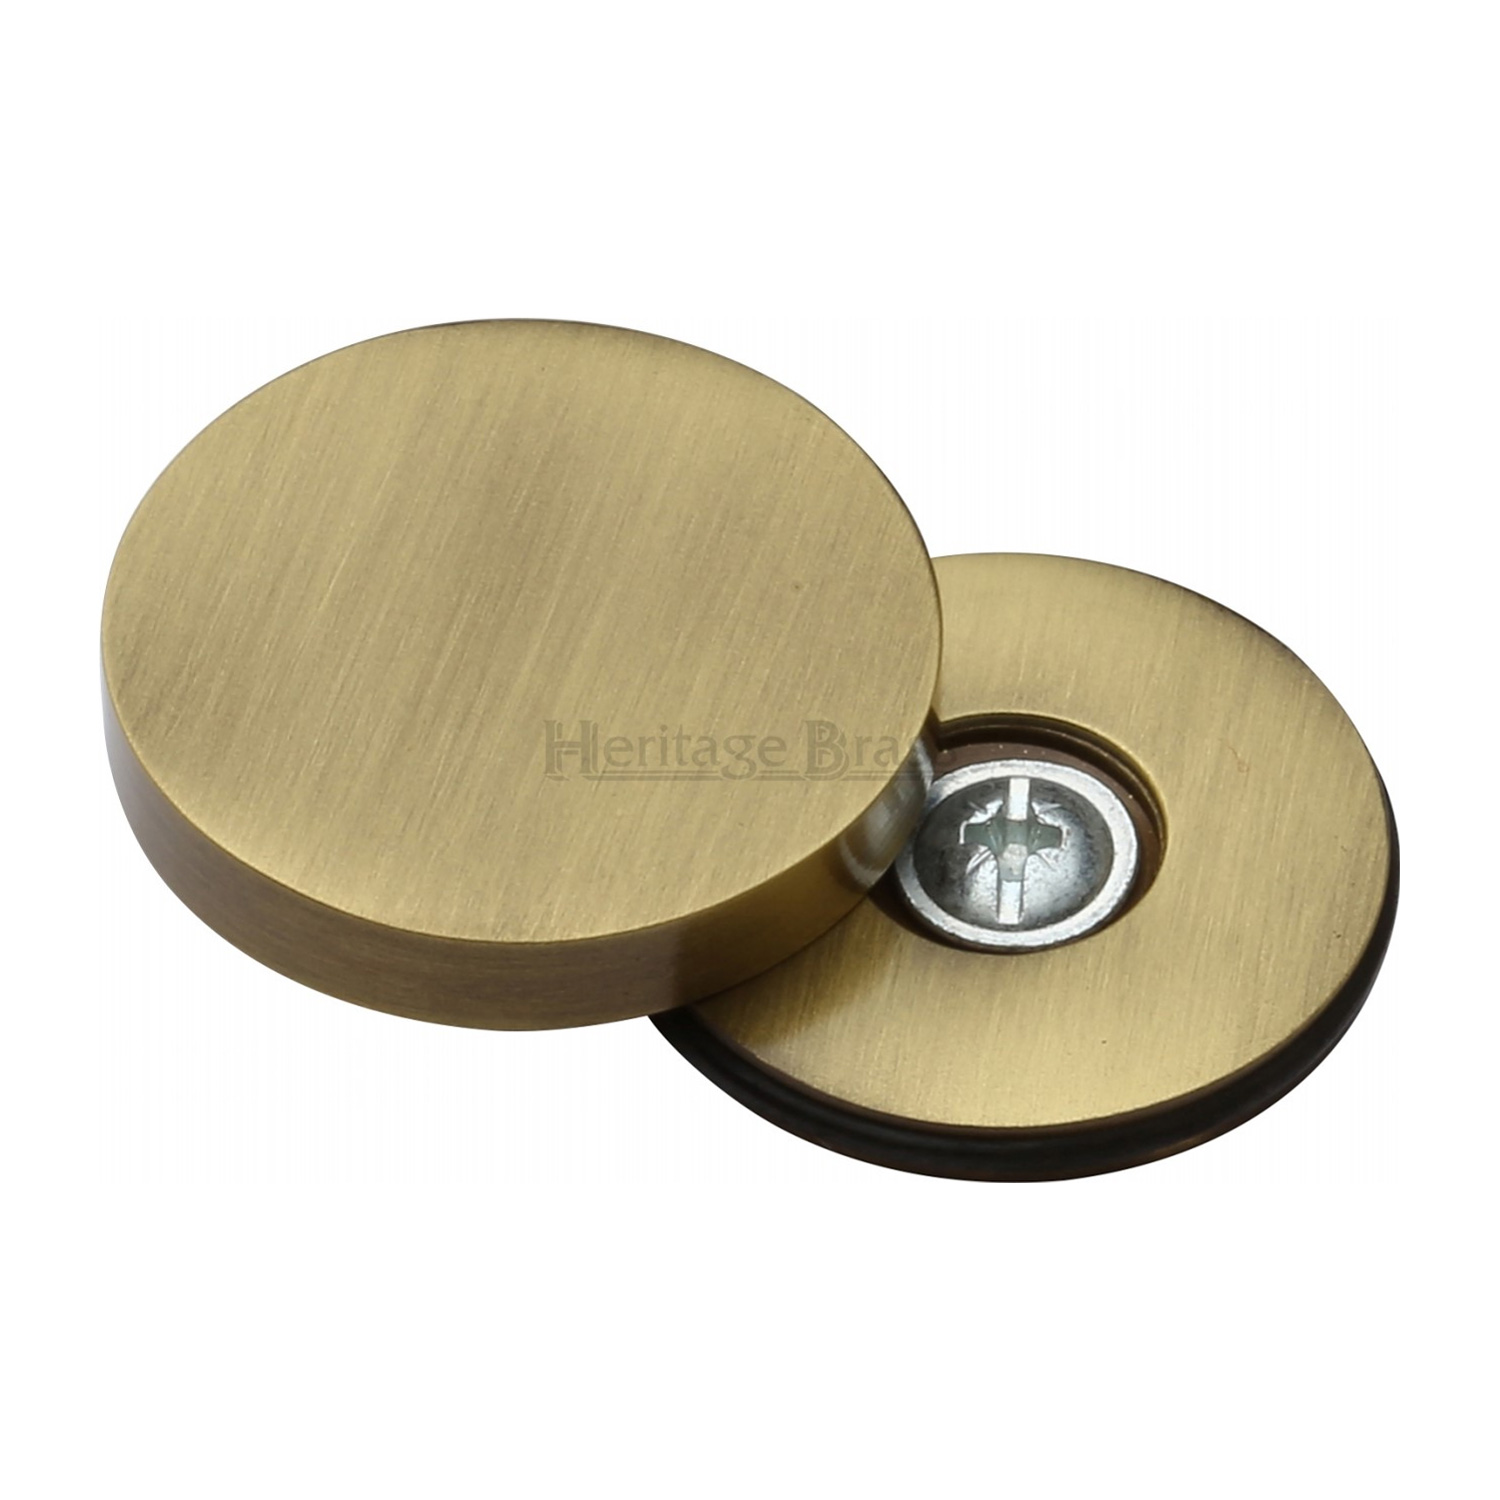 Heritage Brass Bolt Cover to conceal metal fasteners